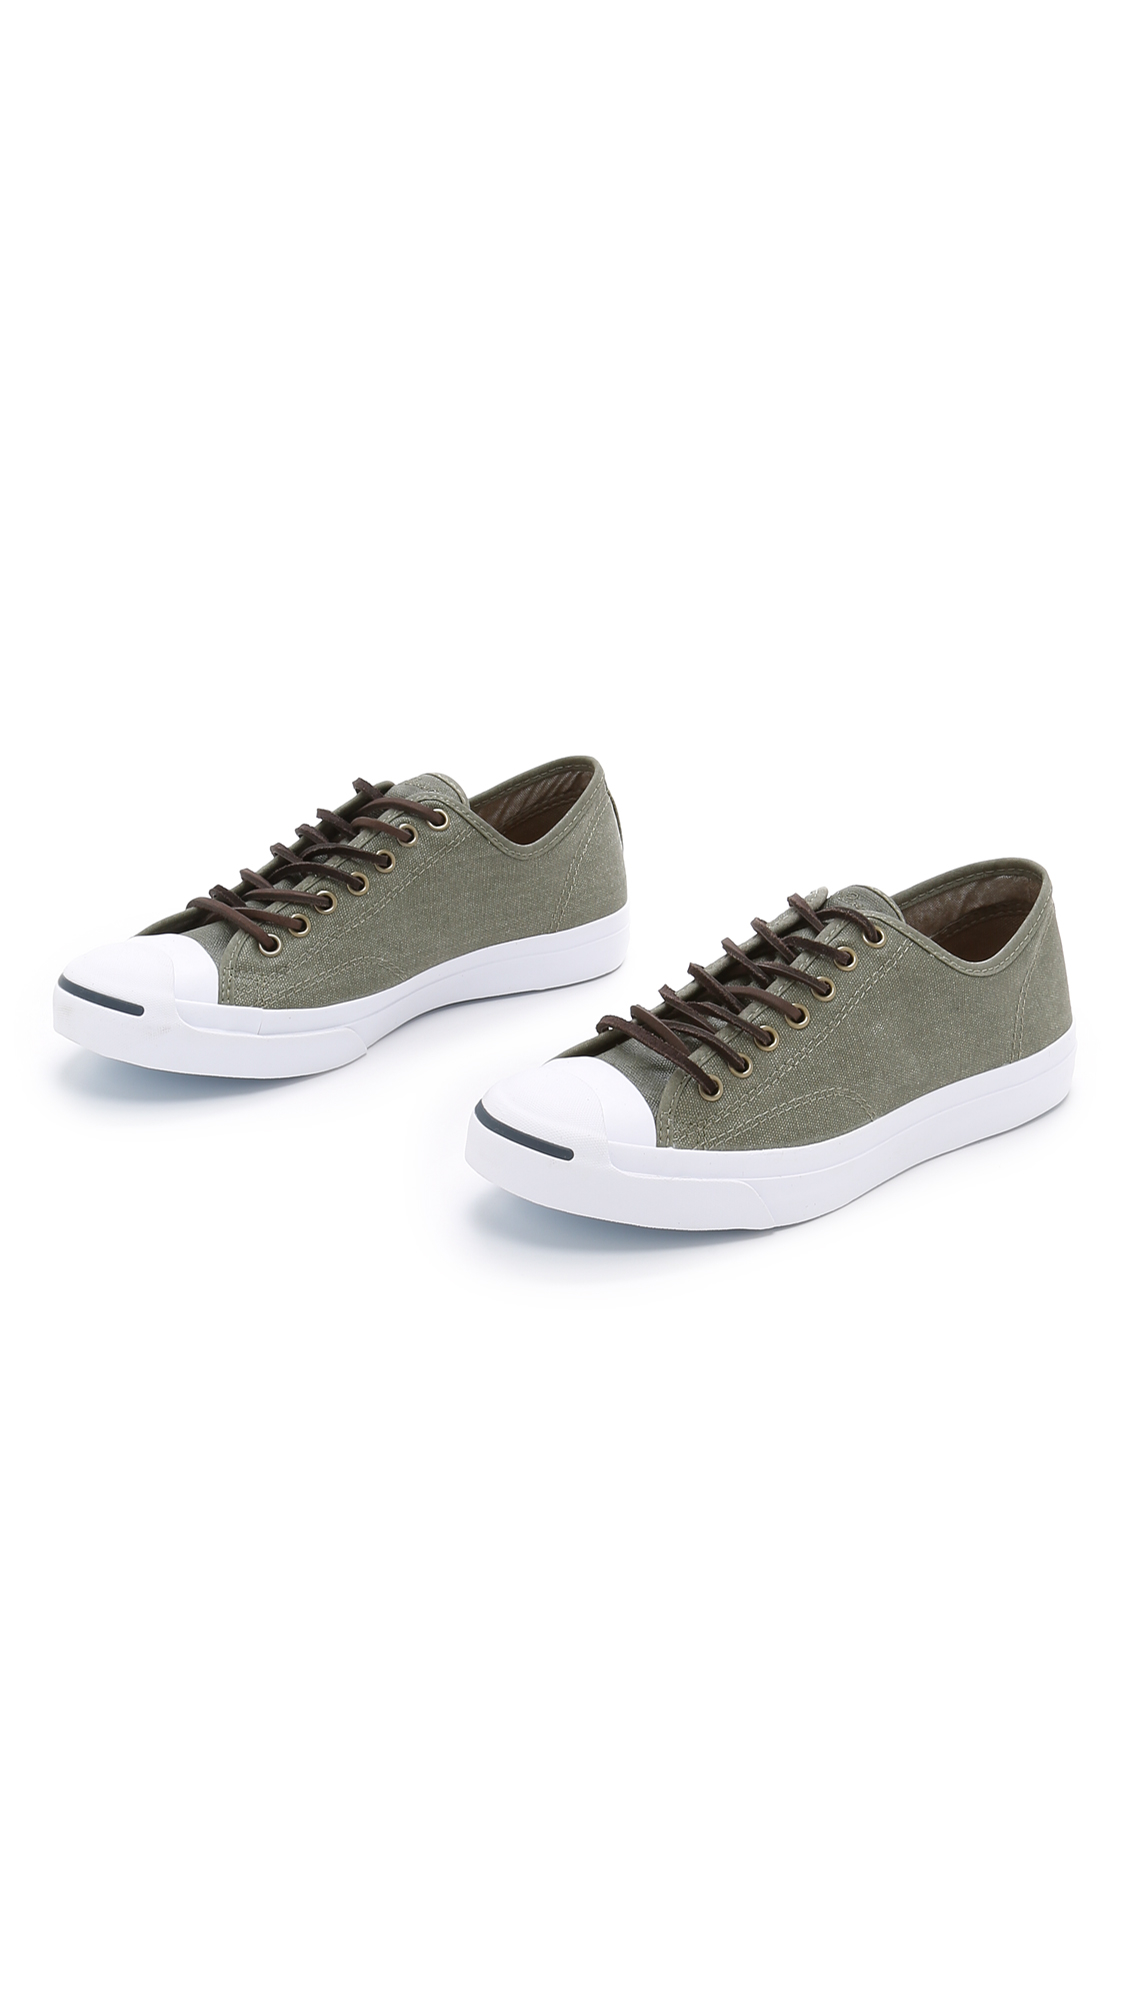 Converse Canvas Jack Purcell  Rubberized Paint  Sneakers in 